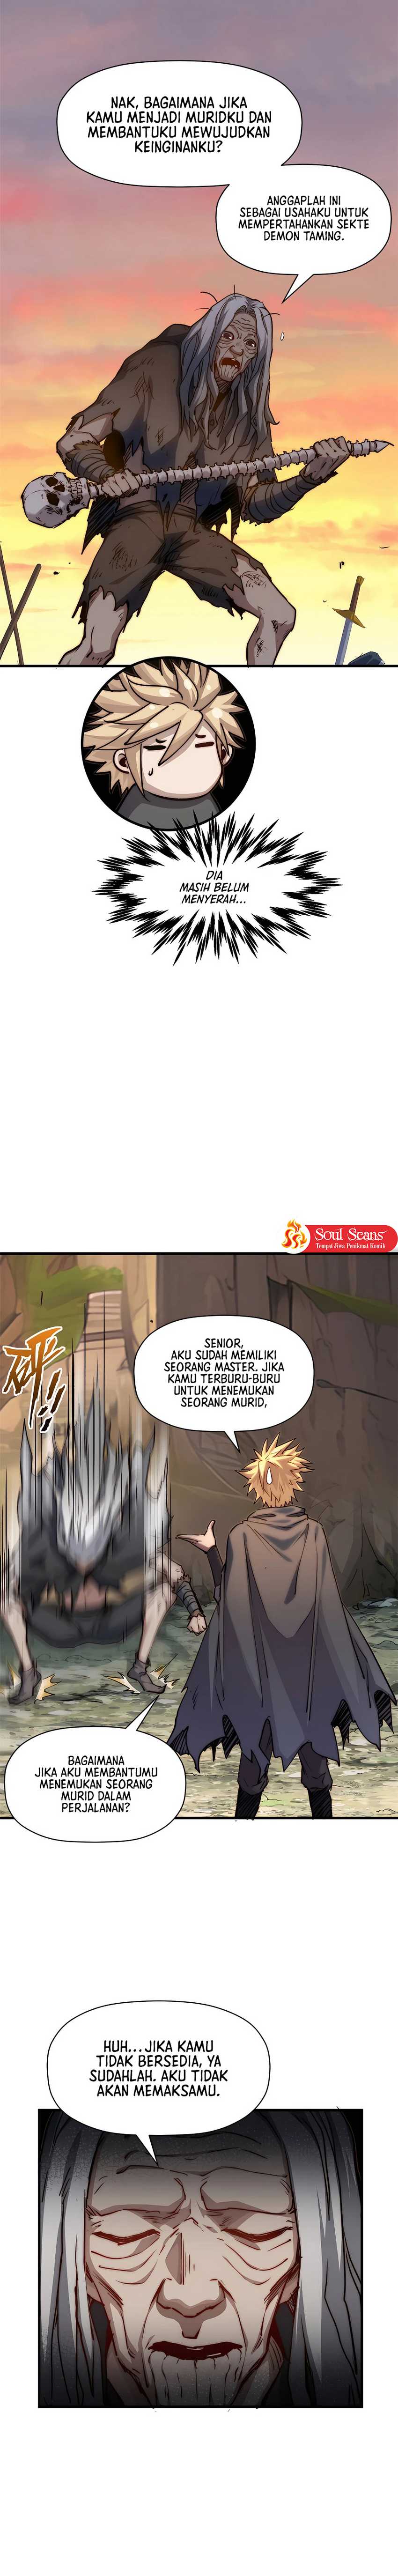 Dilarang COPAS - situs resmi www.mangacanblog.com - Komik top tier providence secretly cultivate for a thousand years 118 - chapter 118 119 Indonesia top tier providence secretly cultivate for a thousand years 118 - chapter 118 Terbaru 12|Baca Manga Komik Indonesia|Mangacan